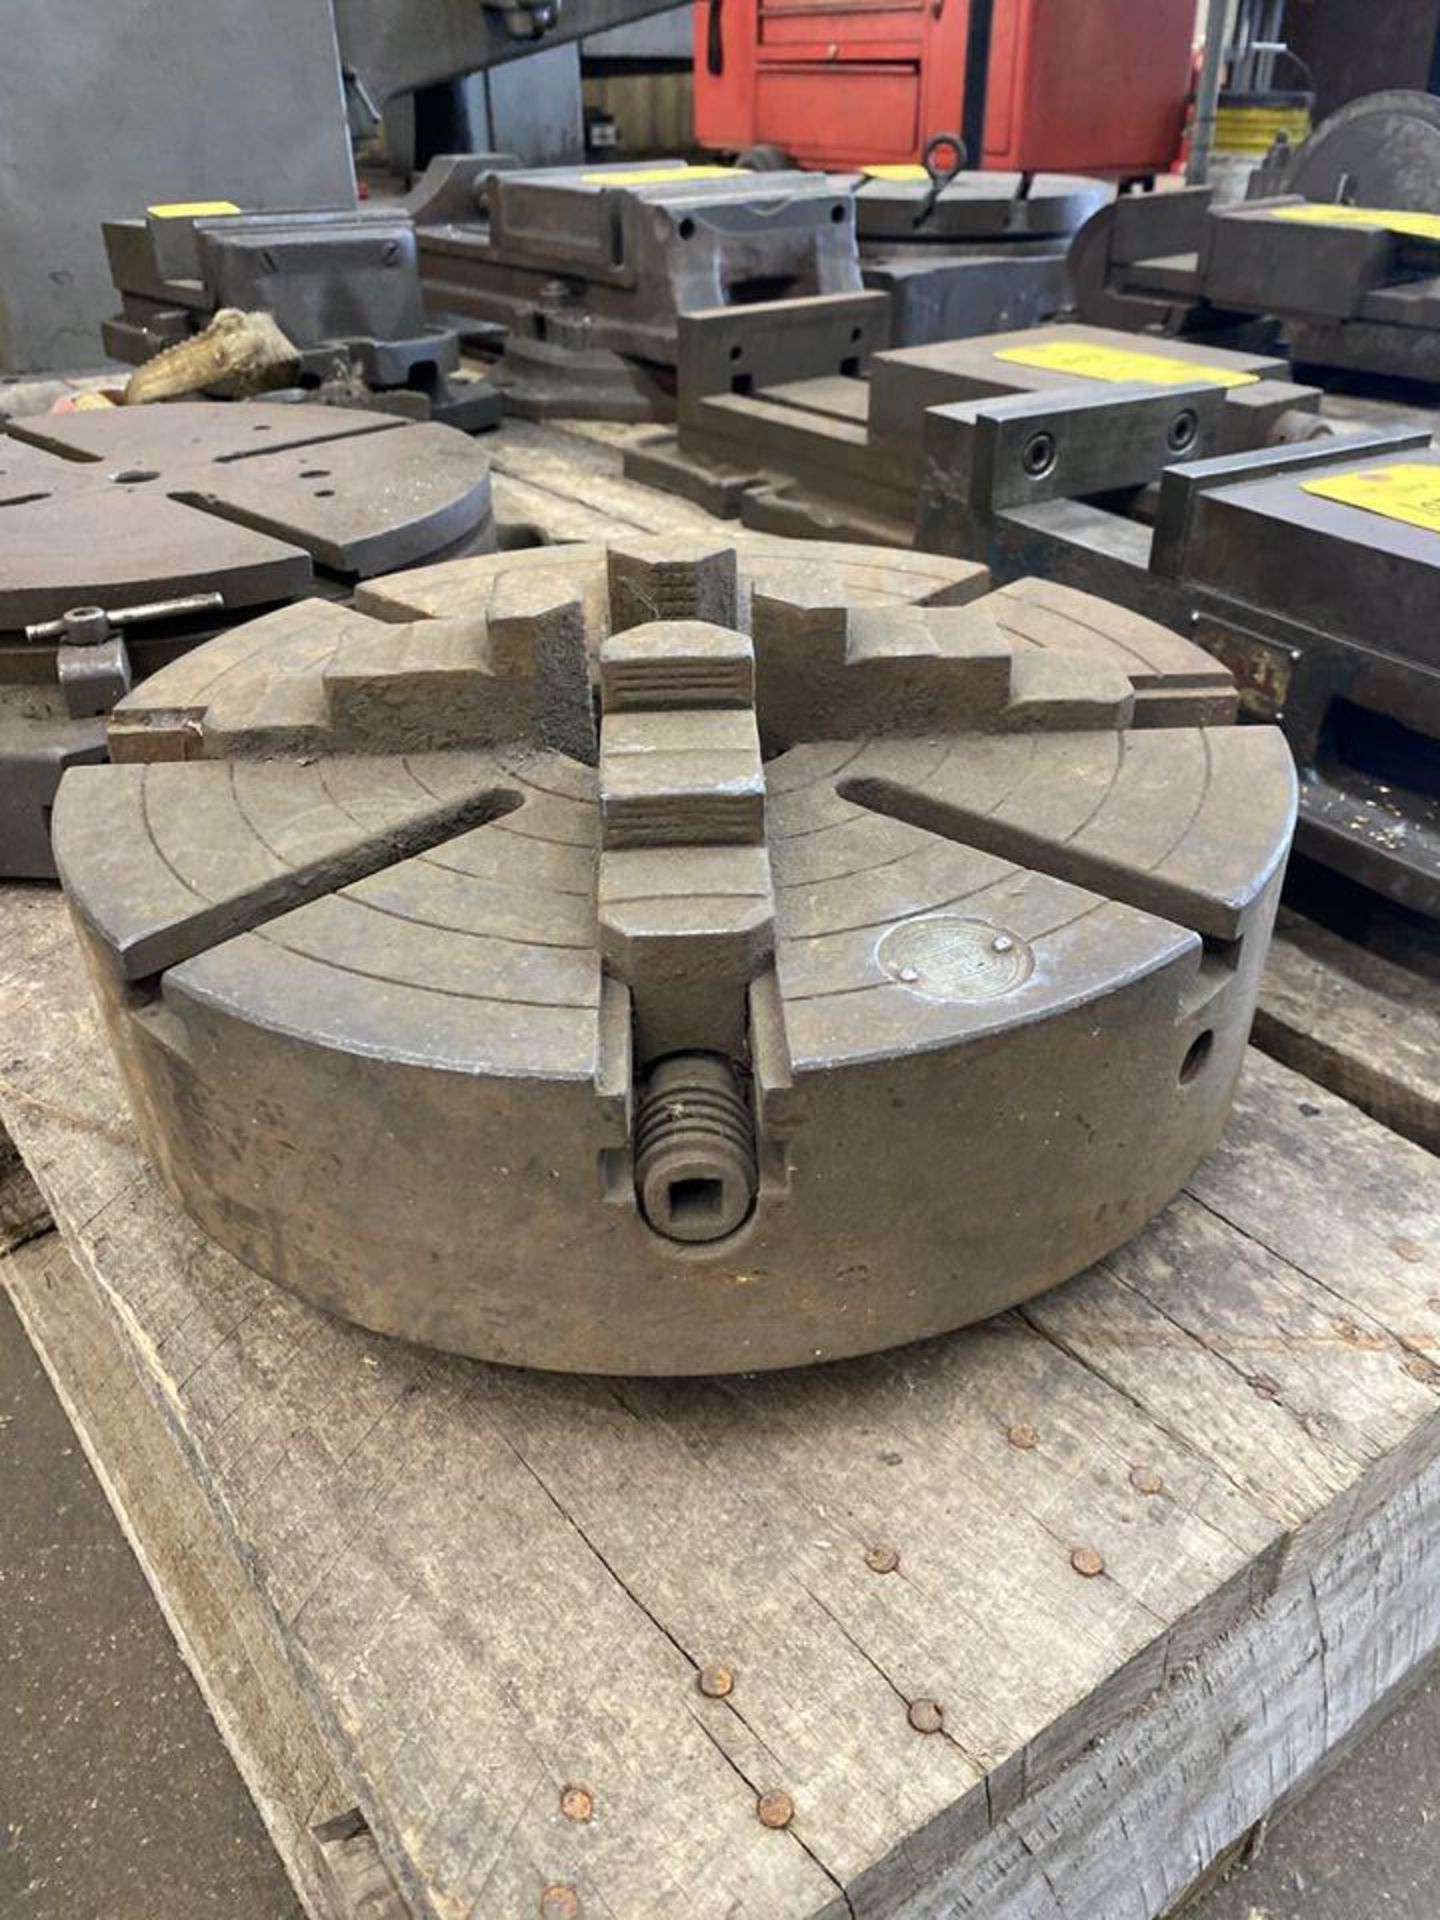 15" Hartford 4-Jaw Chuck with 3" Bore